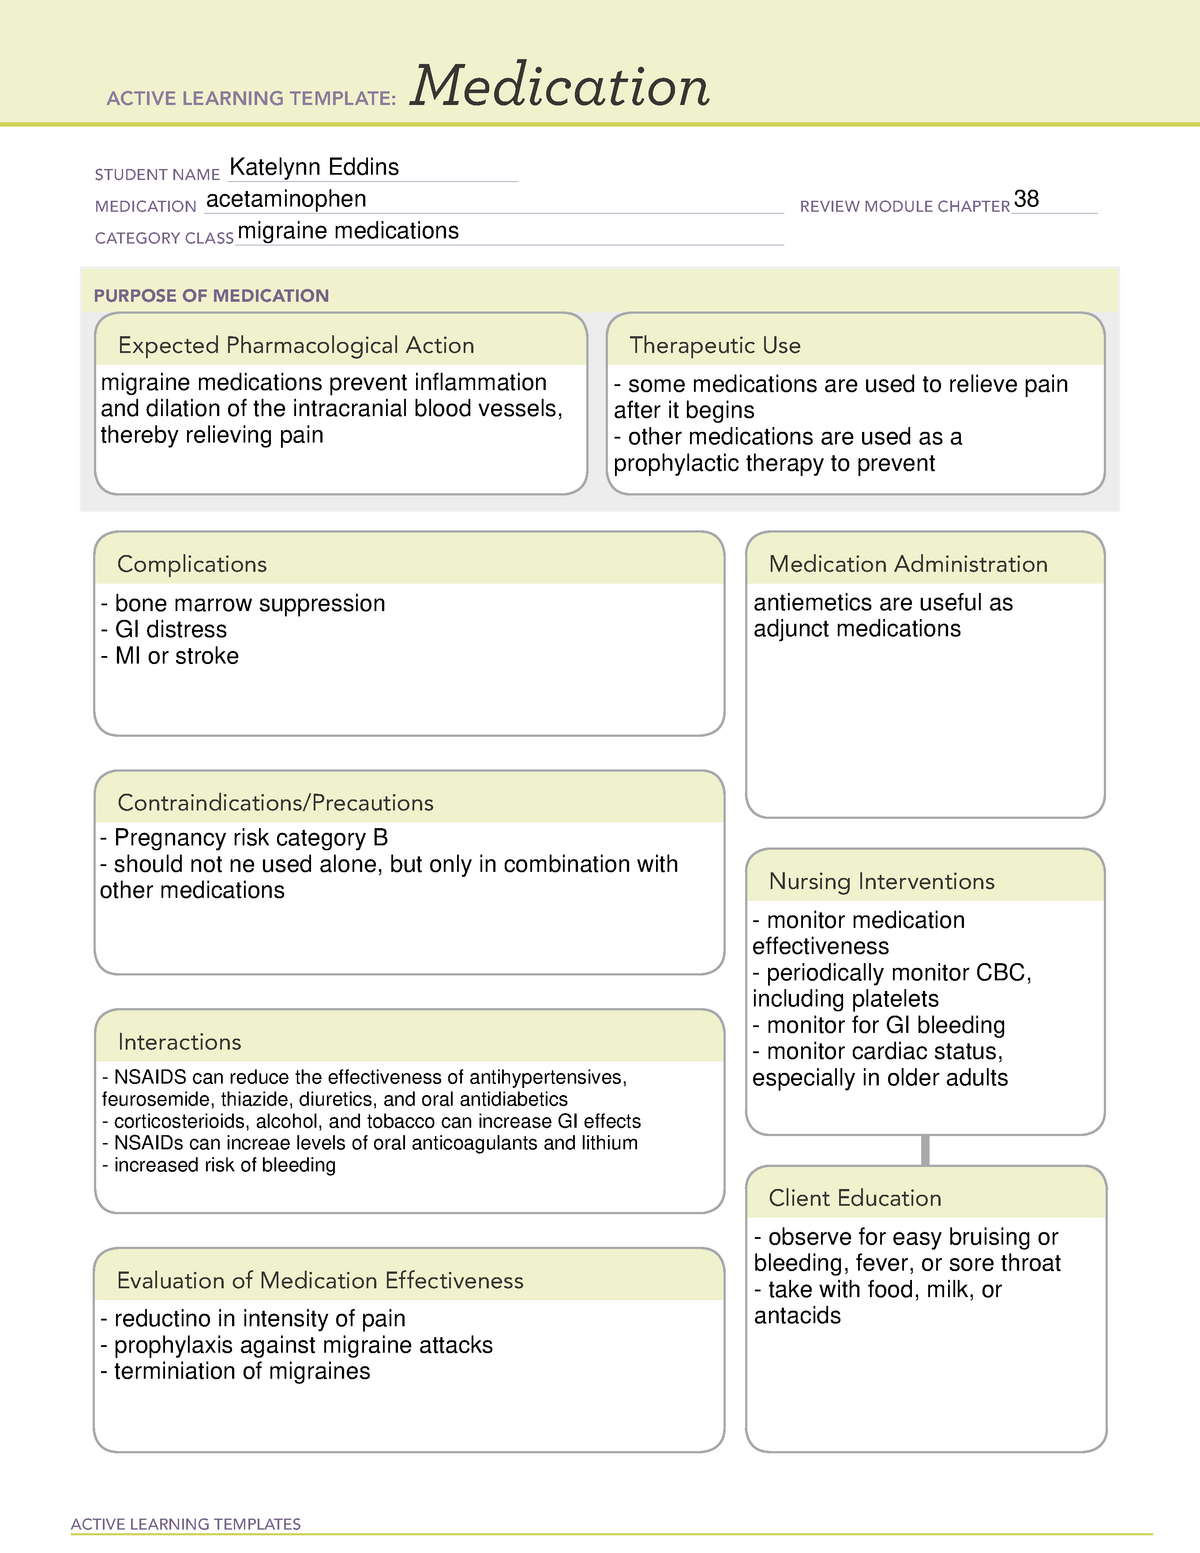 ATI Active Learning Template Acetaminophen ACTIVE LEARNING TEMPLATES Medication STUDENT NAME